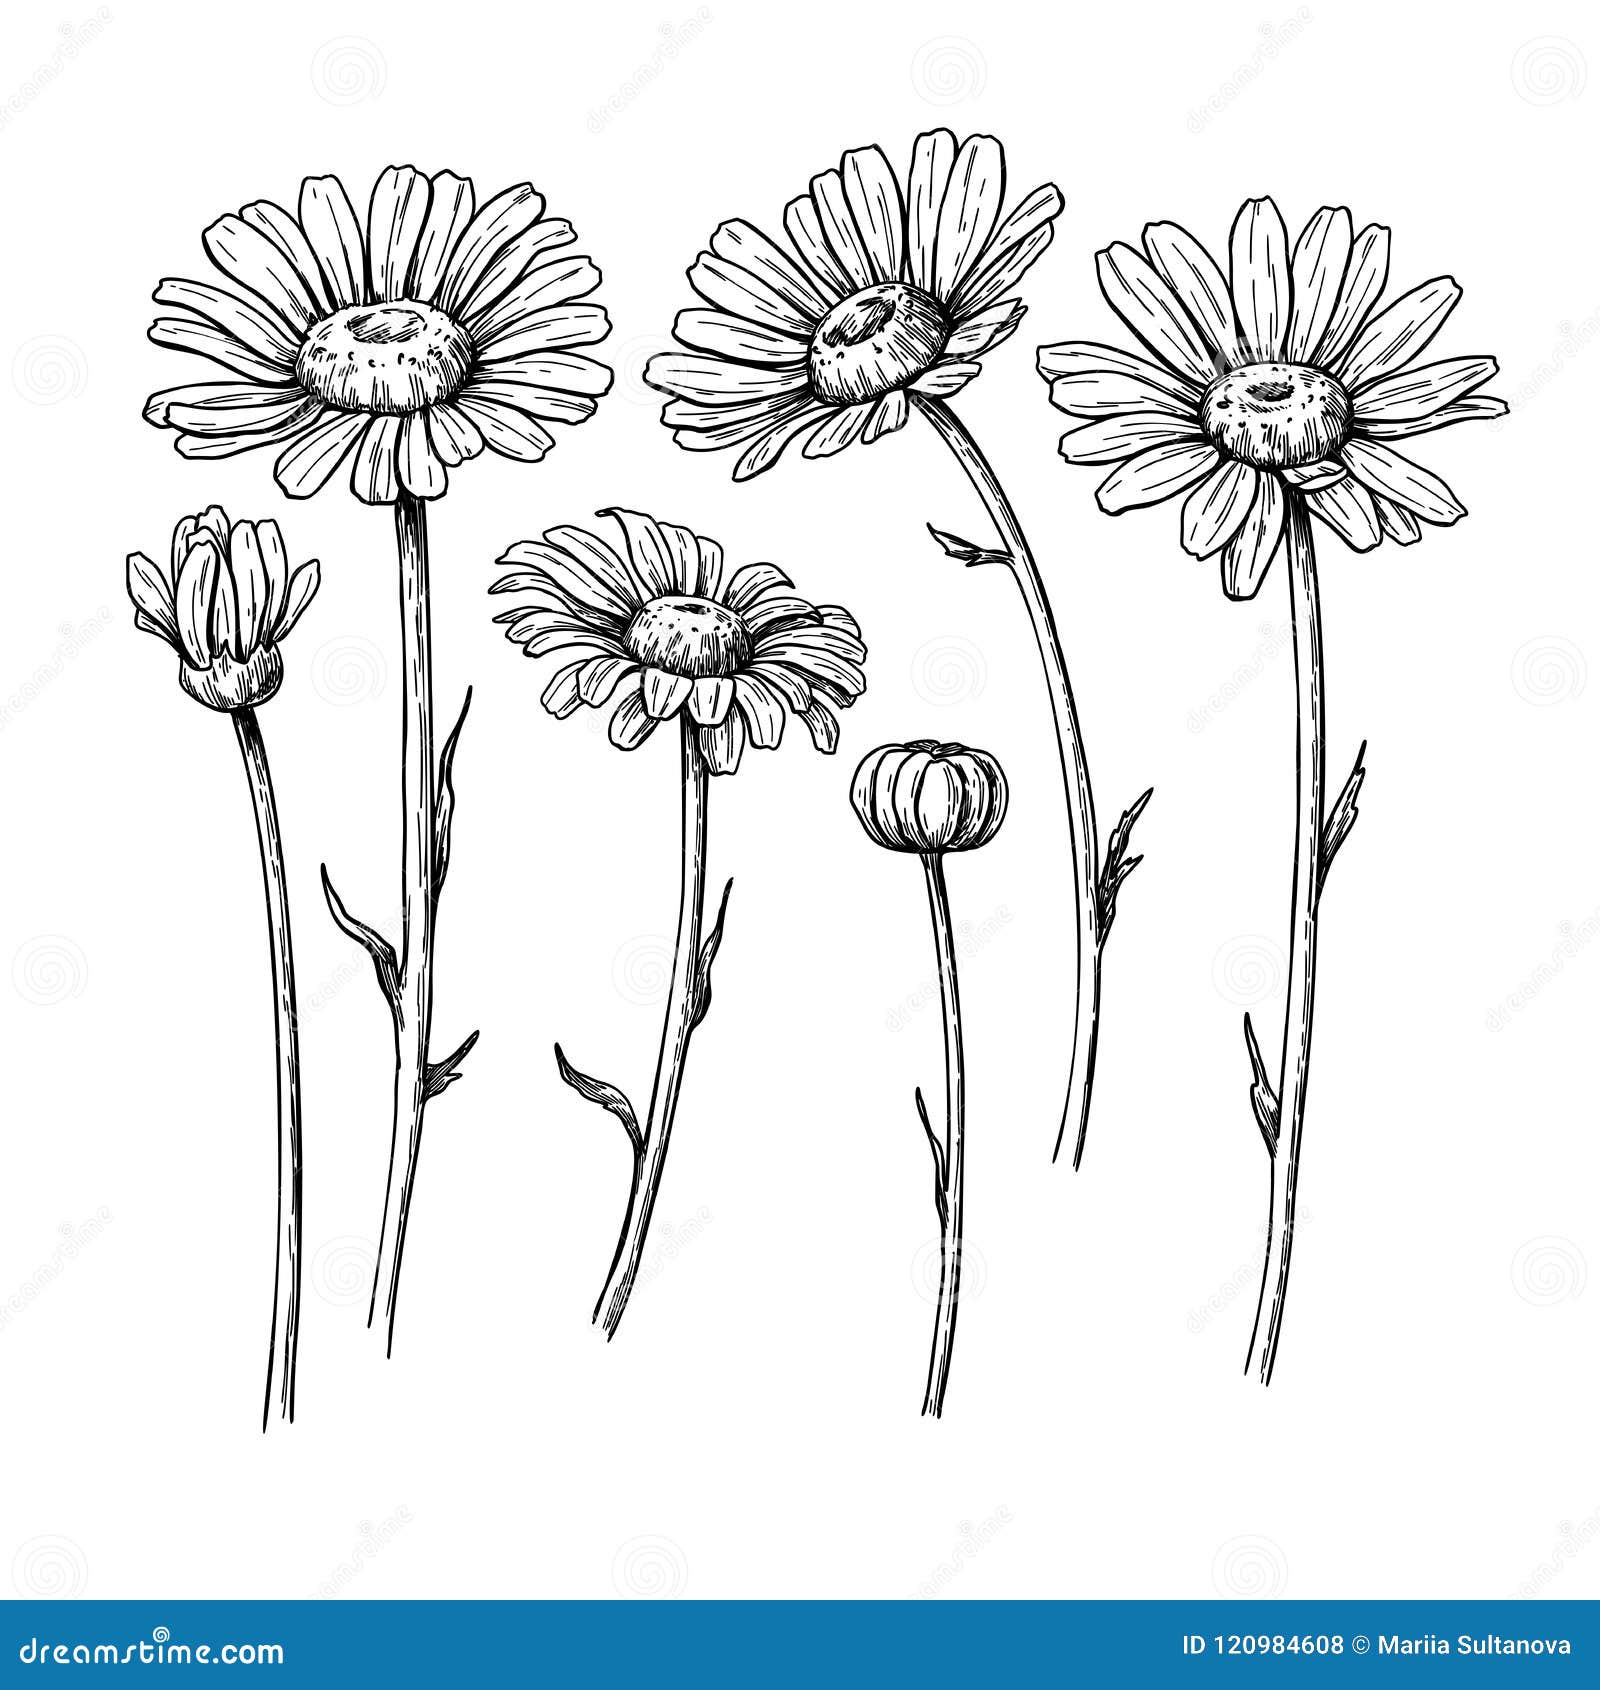 How to Draw a Daisy Flower  A Realistic Daisy Drawing Tutorial